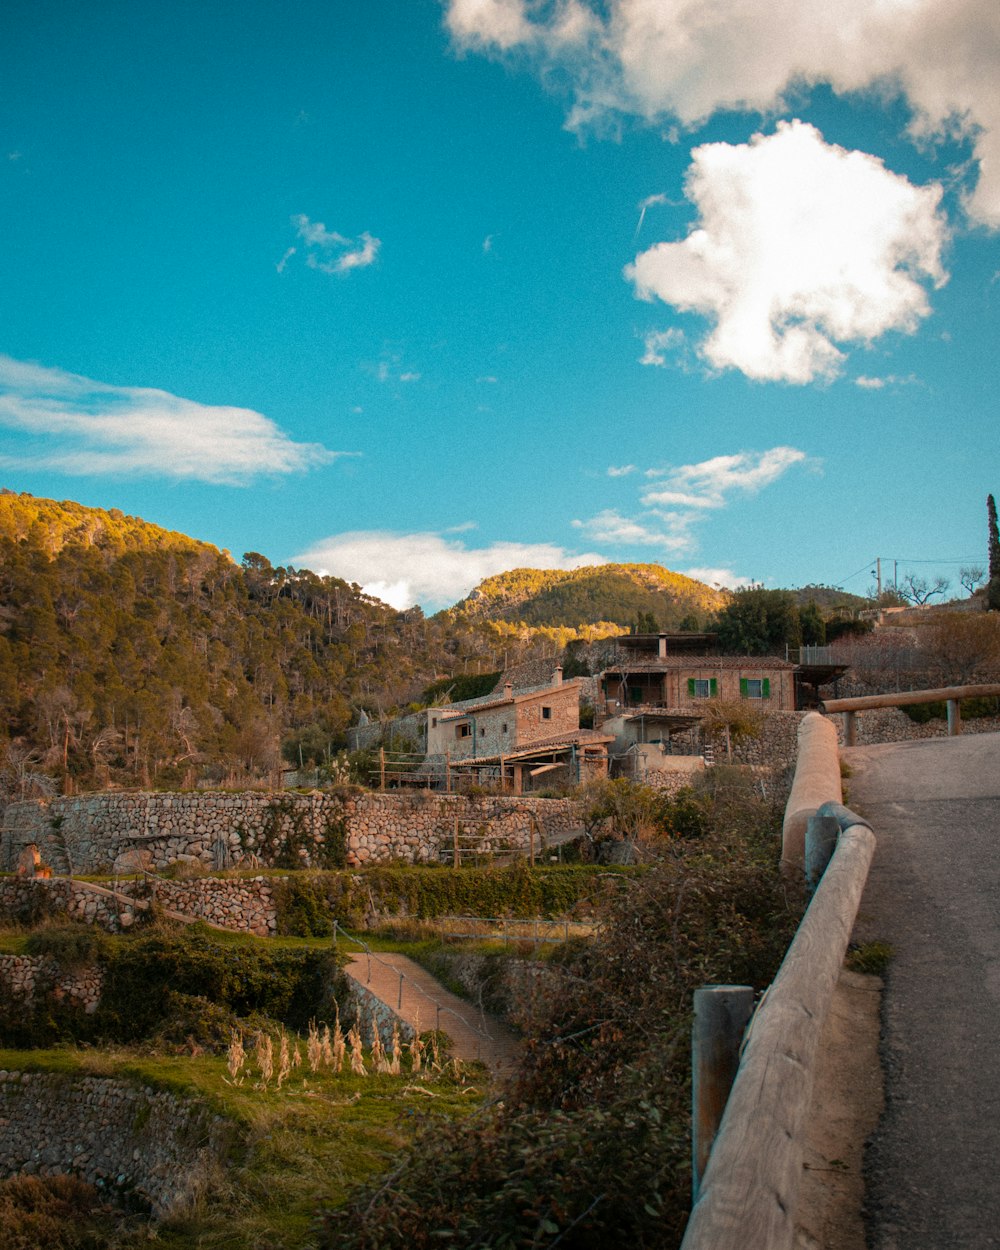 a scenic view of a town with mountains in the background